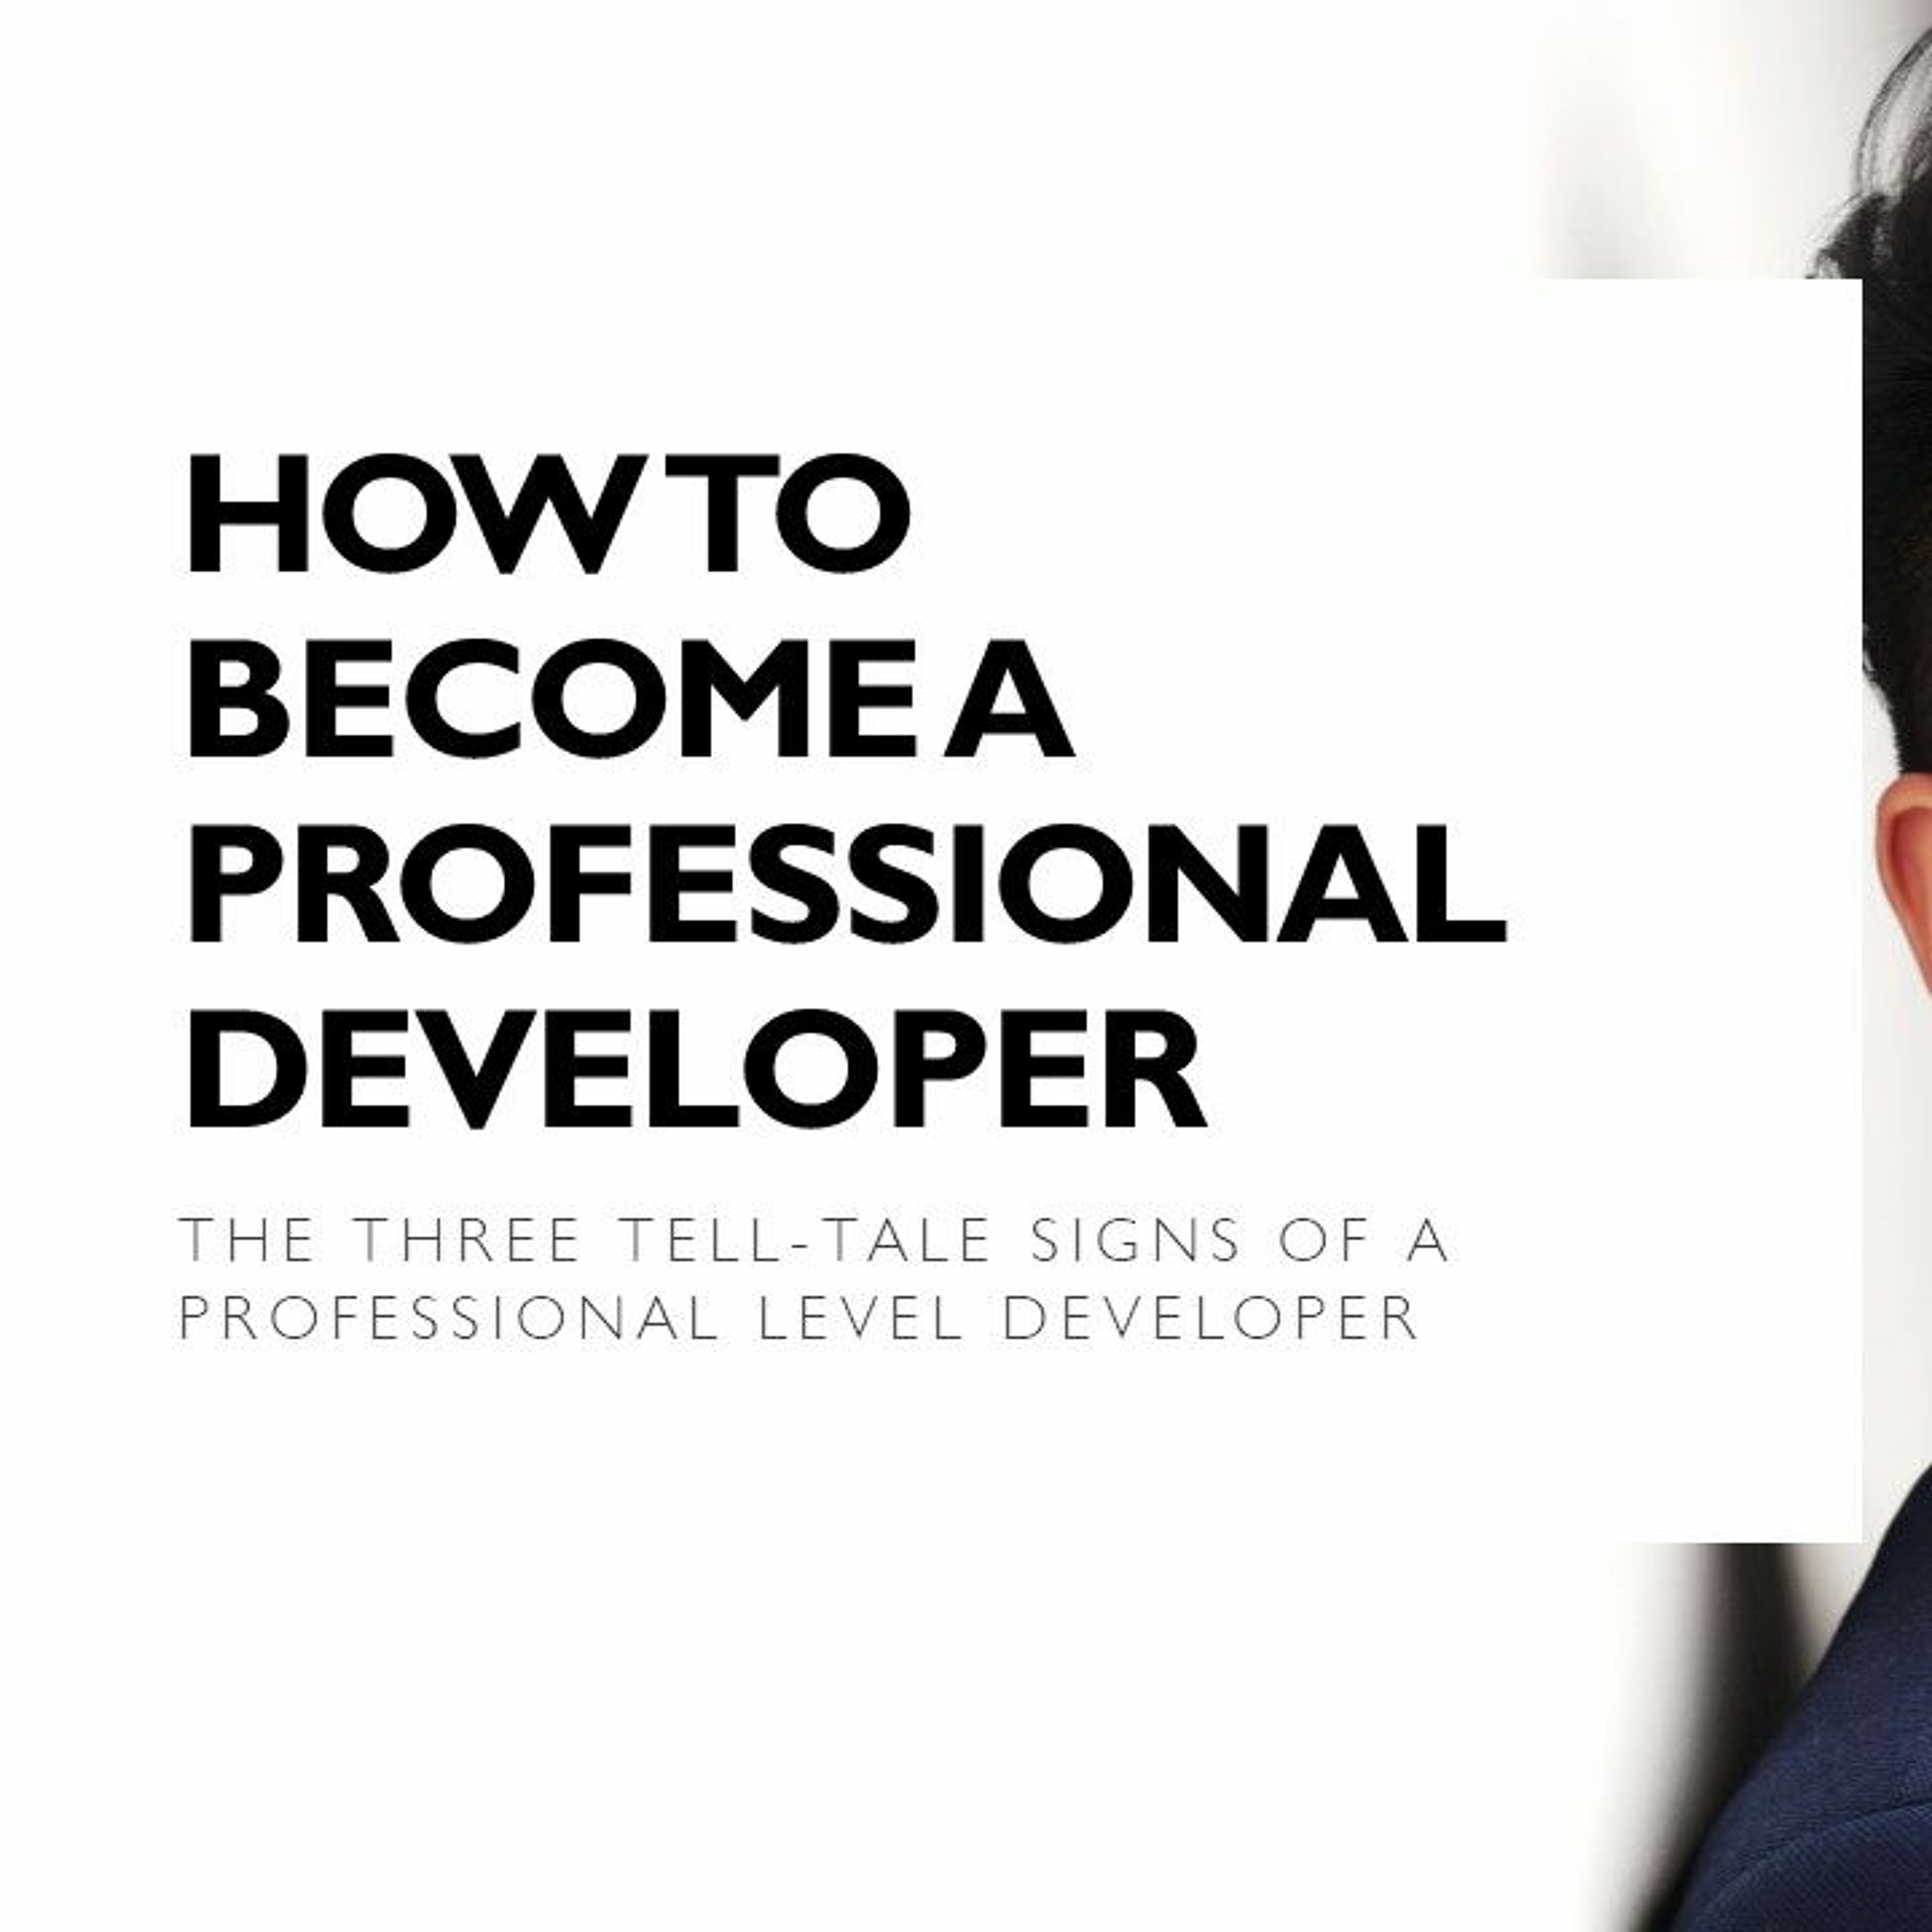 How to become a professional developer